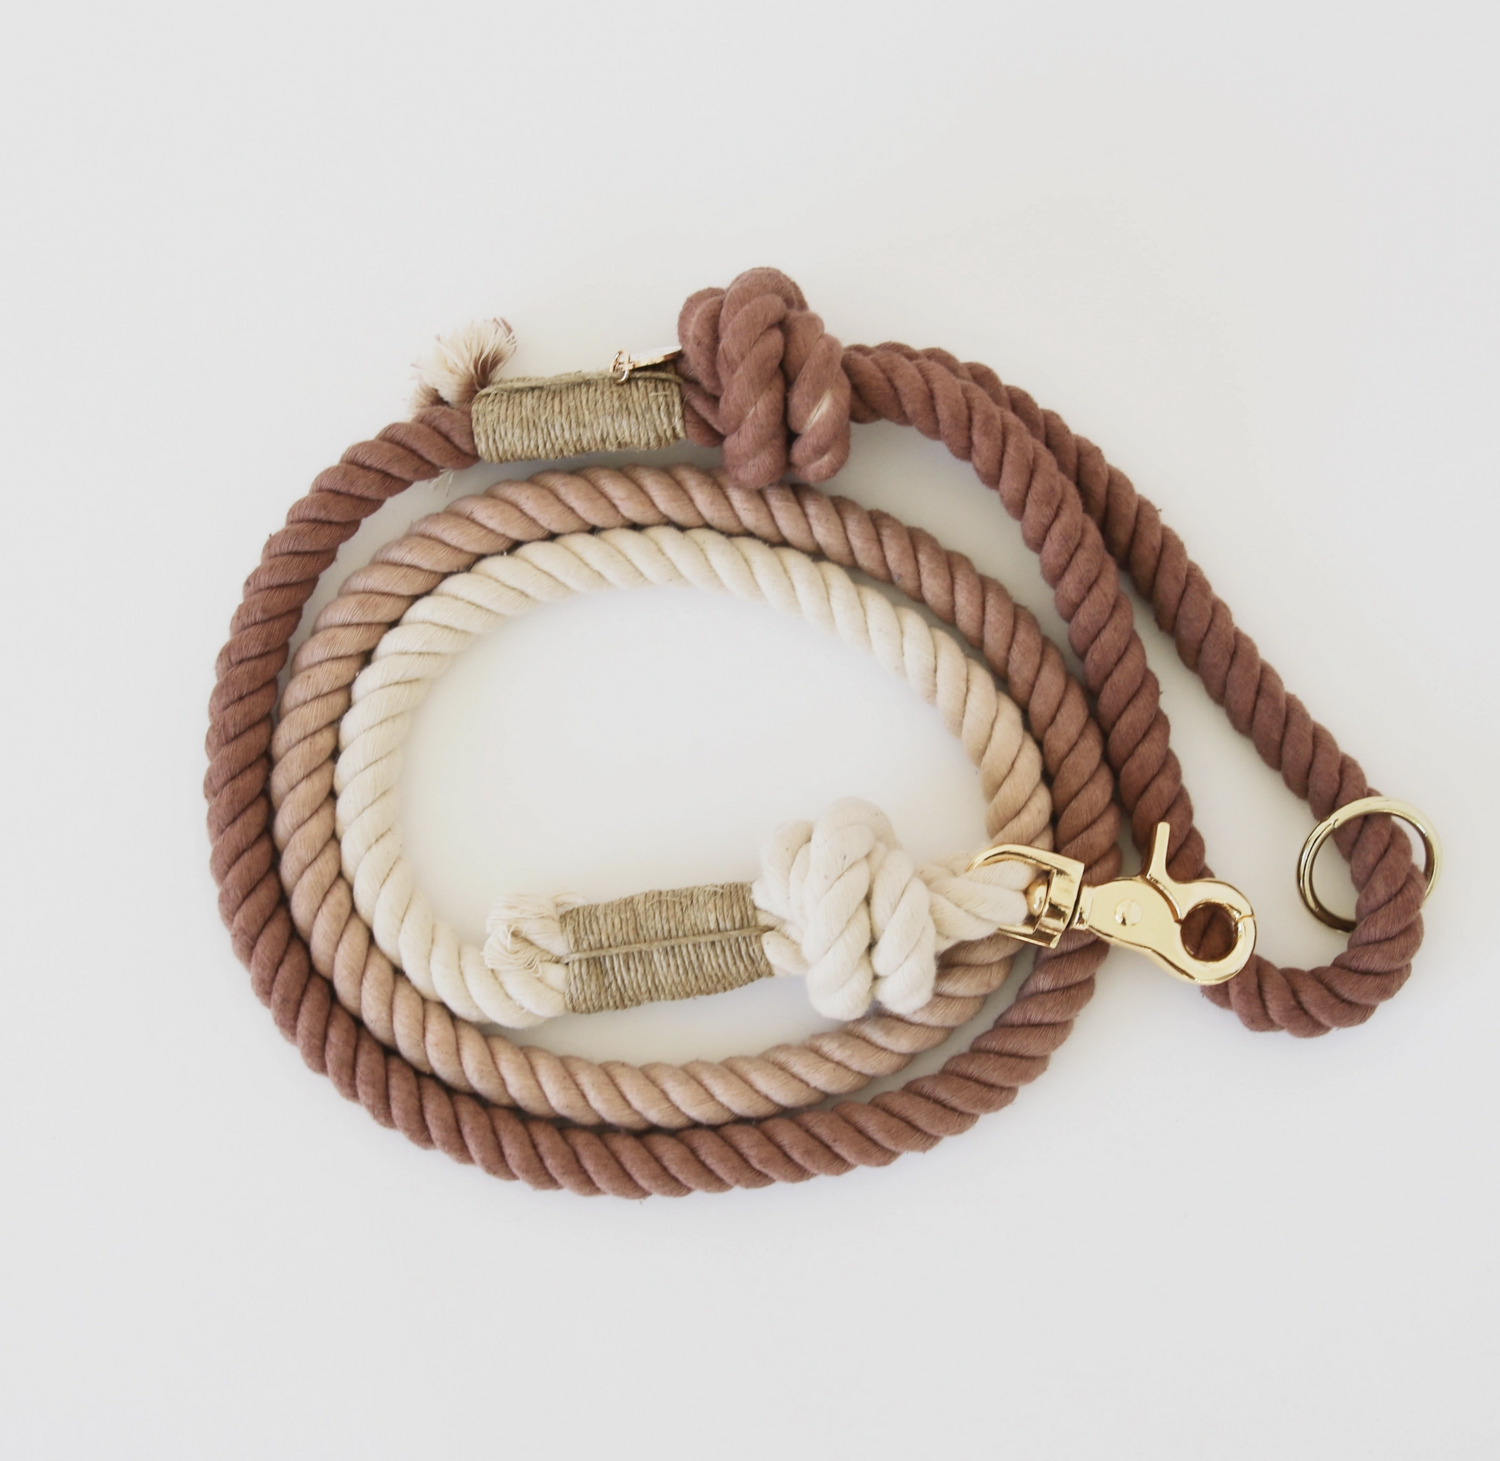 'Cafe Con Leche' - Dog Rope Leash